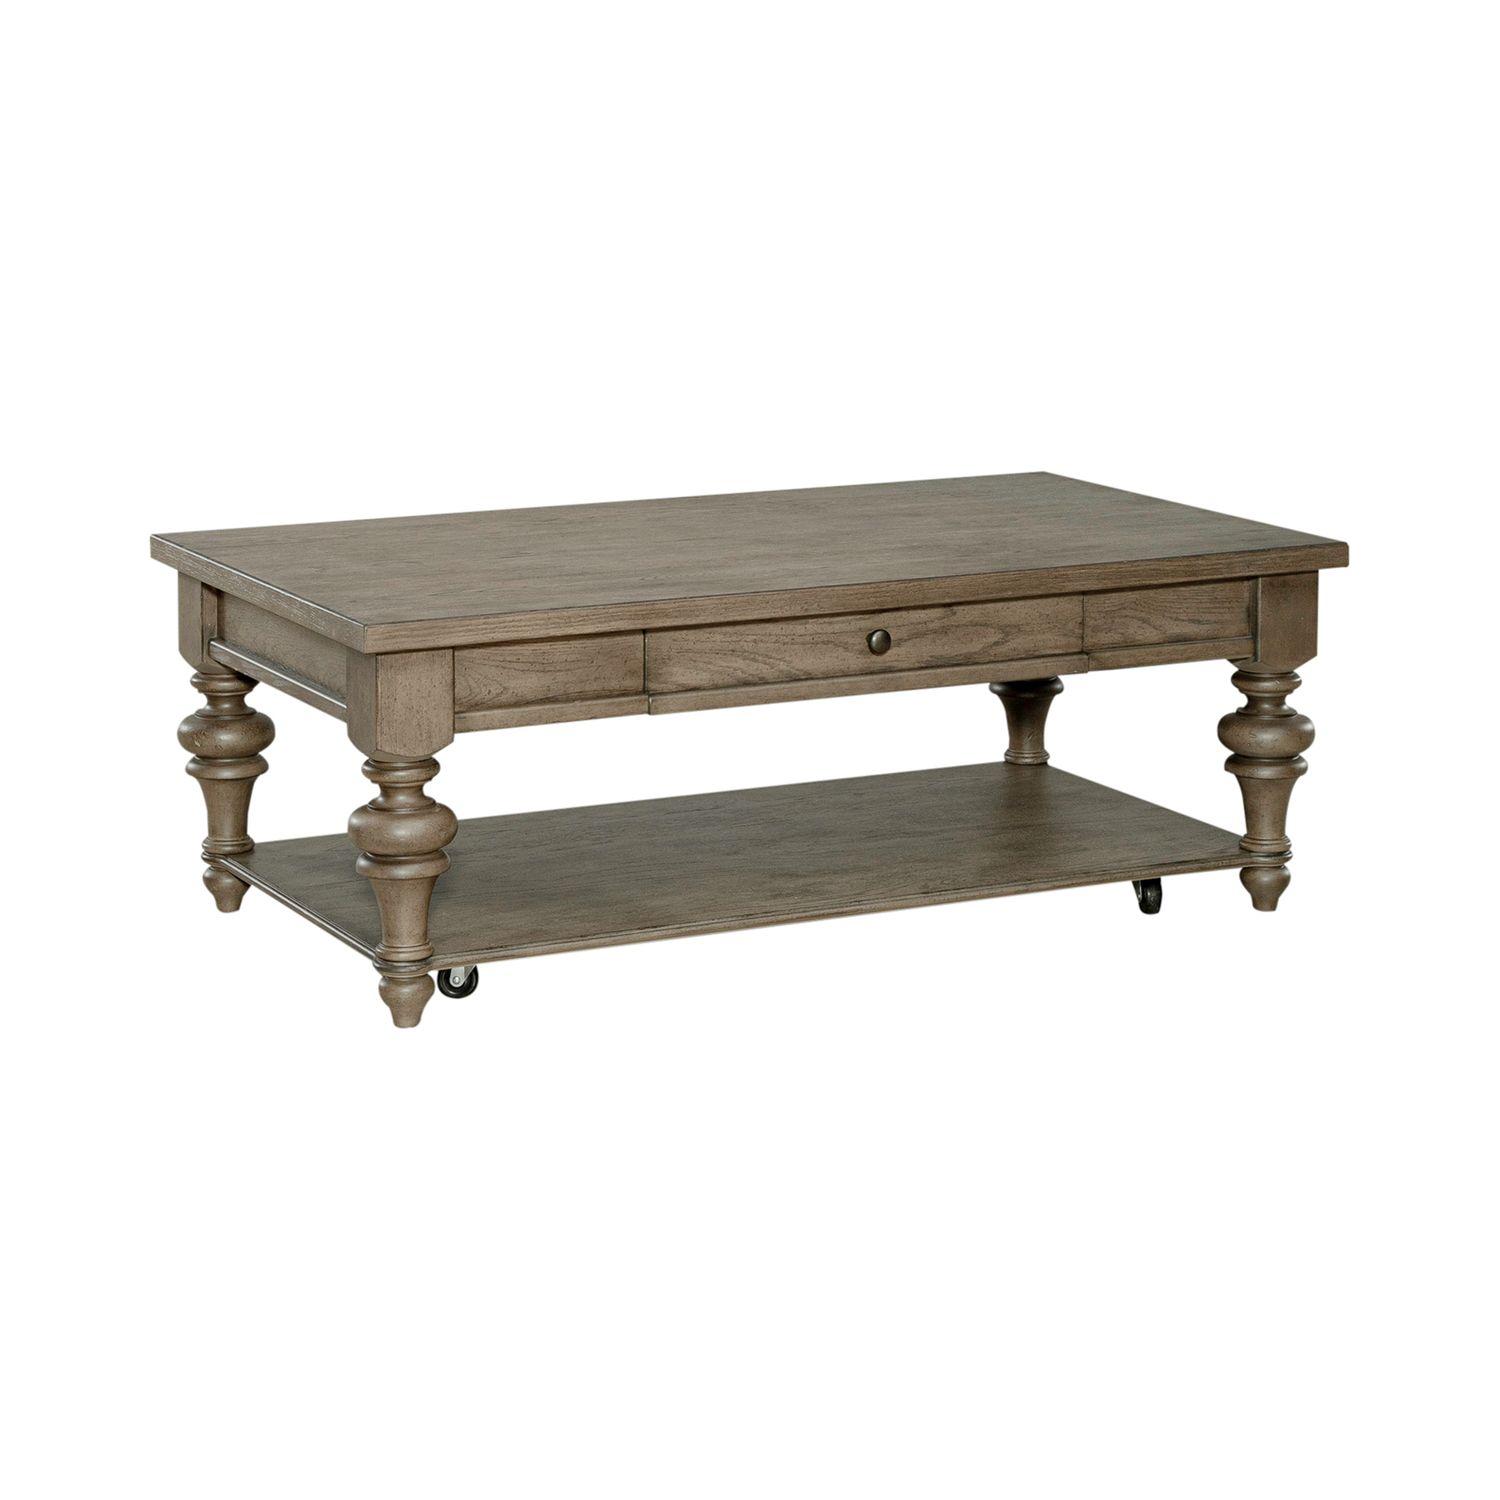 Transitional Cocktail Table Americana Farmhouse (615-OT) 615-OT1010 in Taupe 